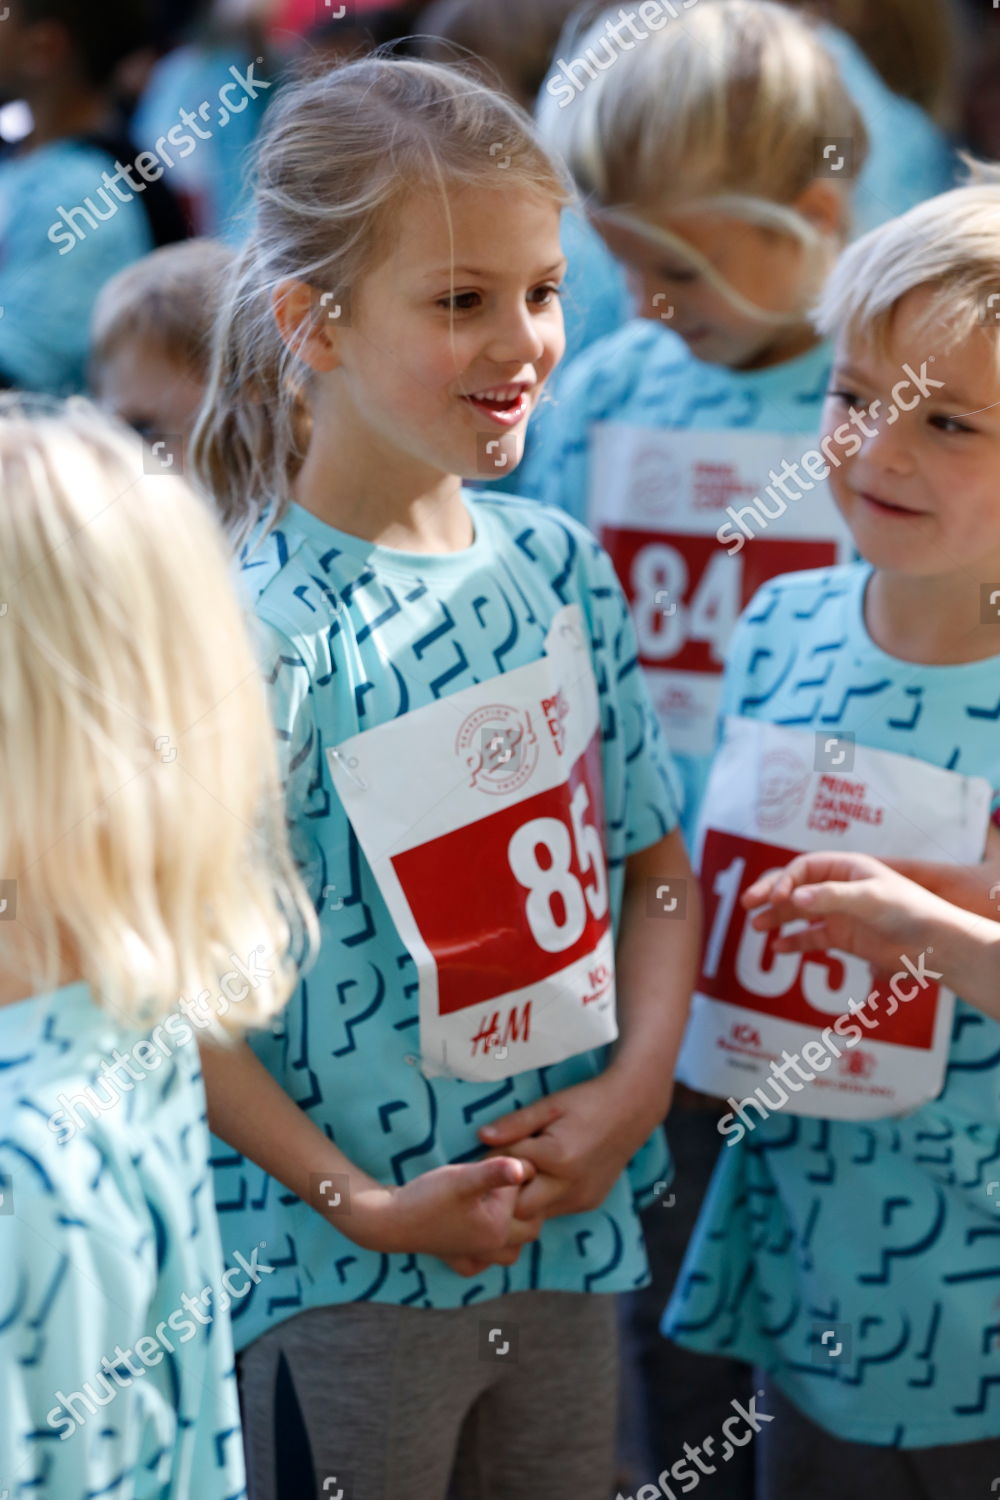 race-and-pep-day-stockholm-sweden-shutterstock-editorial-9884111j.jpg